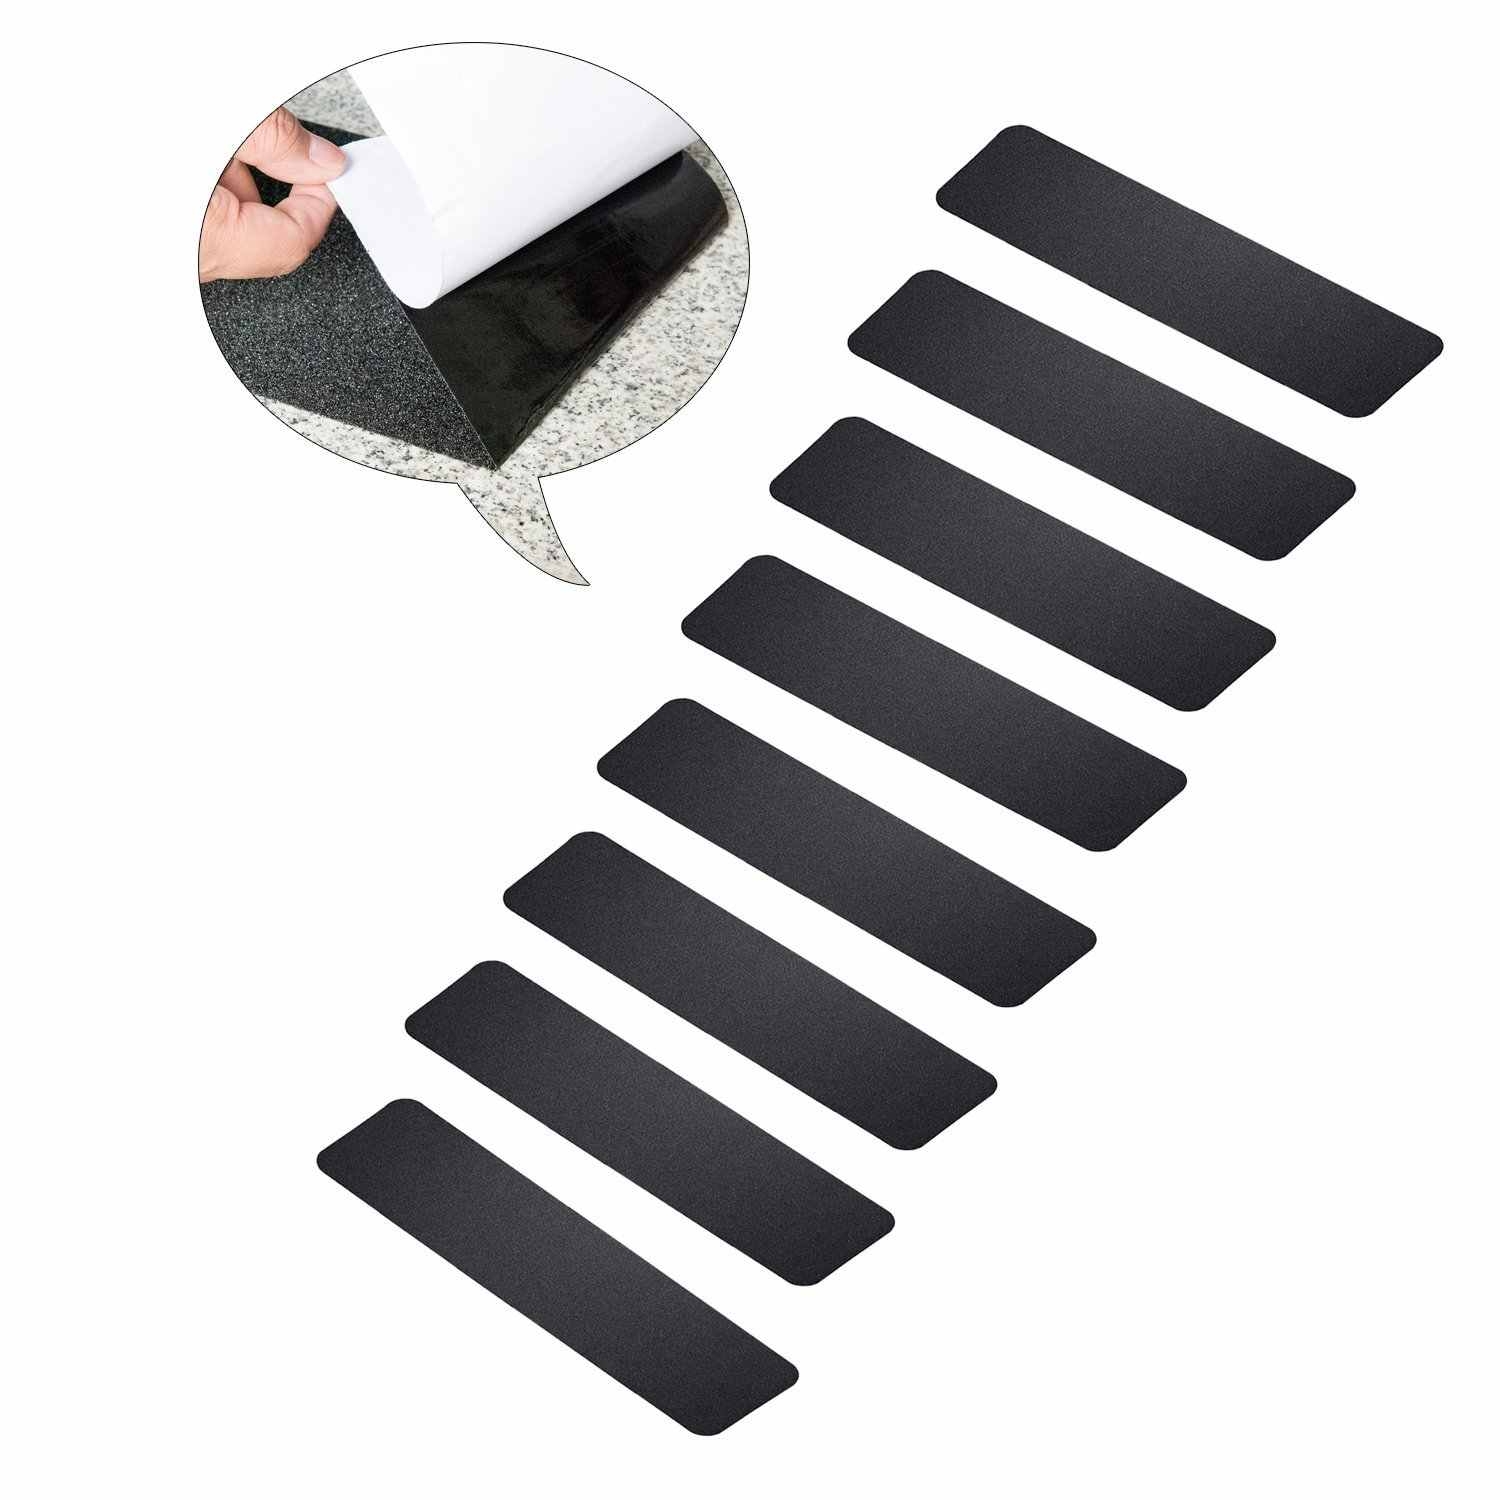 SKID GUARD Outdoor Stair Treads Non-Slip Tape (3/4 x12) Stair Treads for  Wooden Steps - Anti Slip Tape - High Grit Grip Tape - Non Skid Tape for